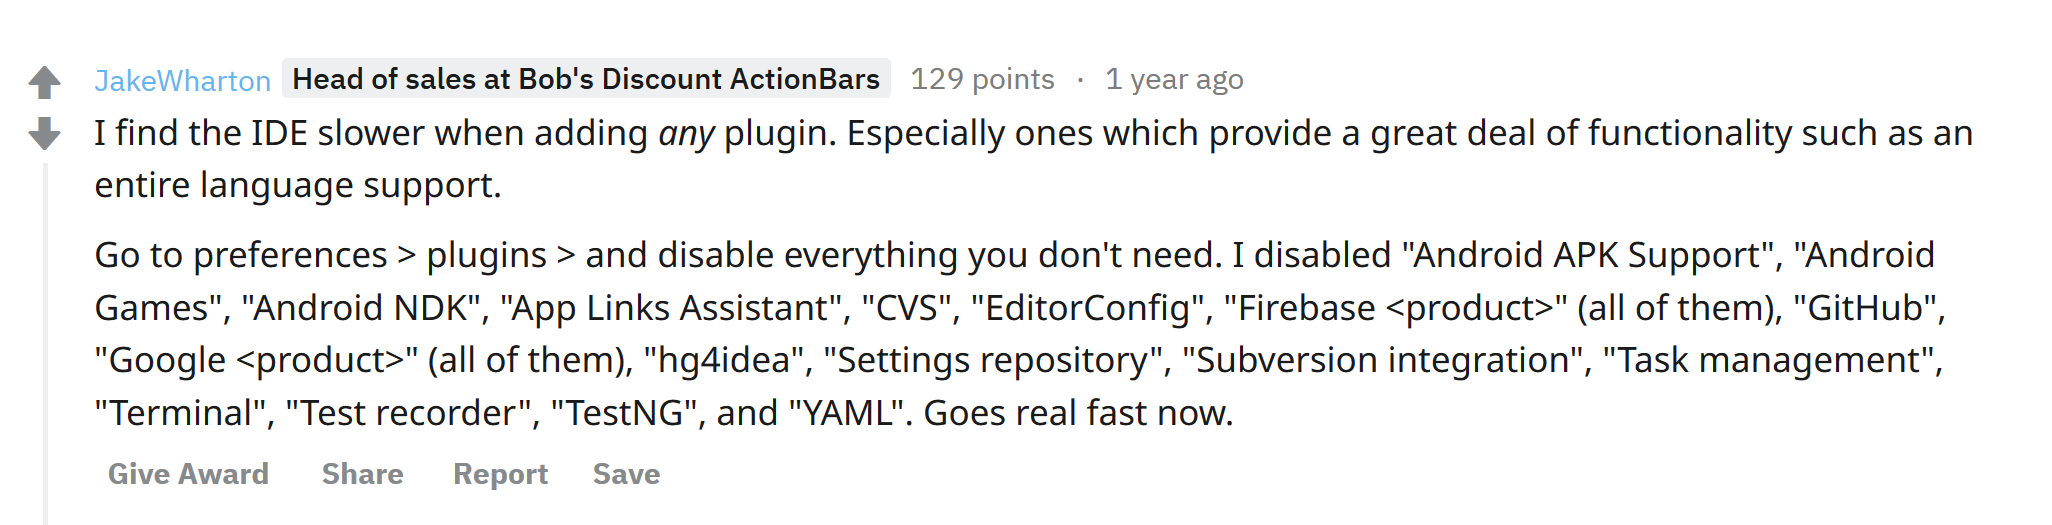 A [comment from Jake Wharton](https://www.reddit.com/r/androiddev/comments/7sxhig/android_studio_slower_when_using_kotlin/dt88pgn) on a [post on Reddit](https://www.reddit.com/r/androiddev/comments/7sxhig/android_studio_slower_when_using_kotlin/)